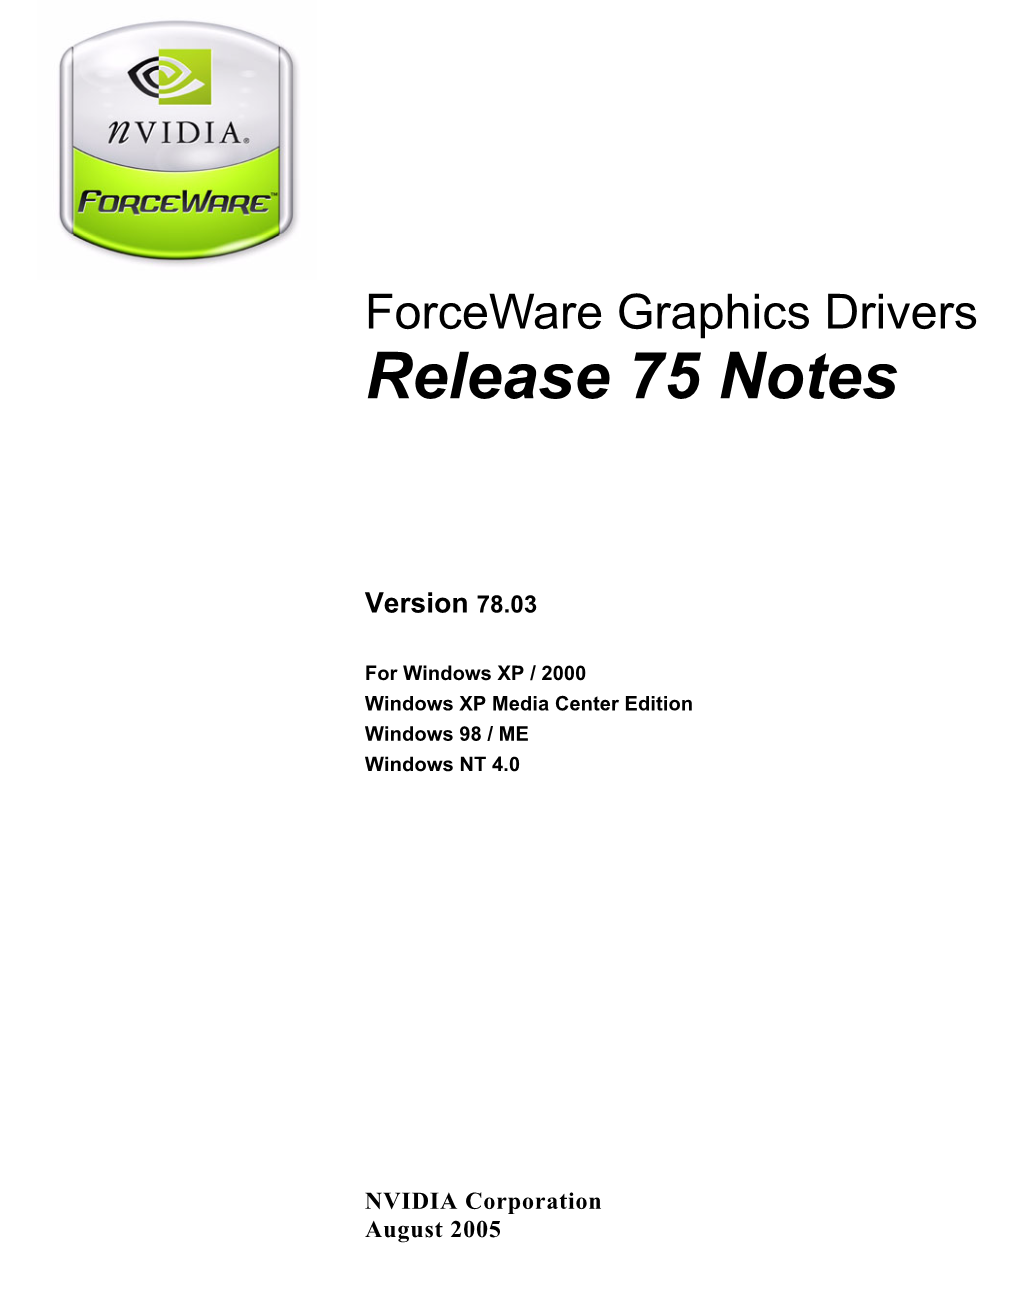 Release 75 Notes